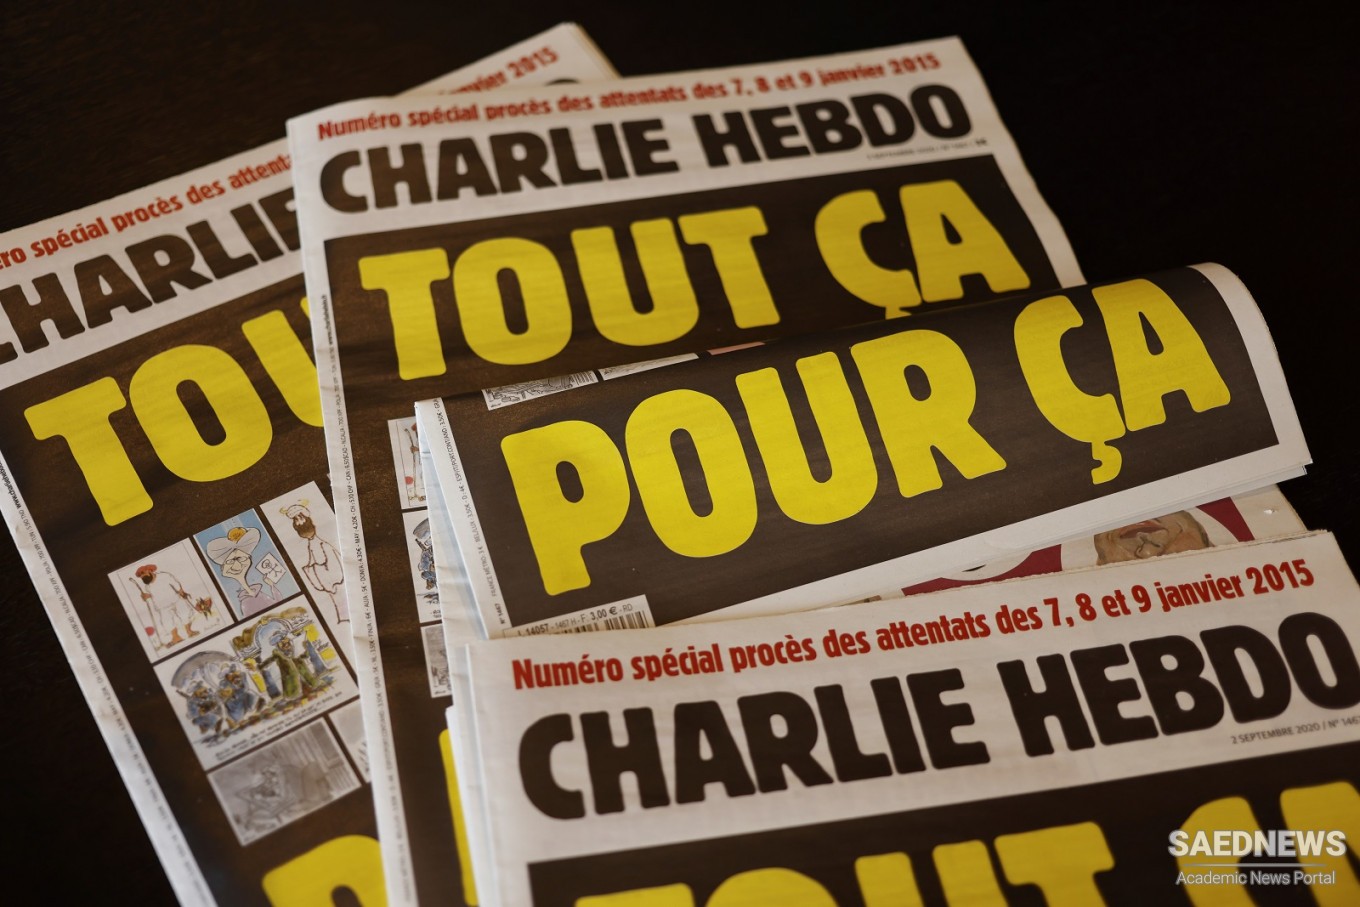 Charlie Hebdo’s desecration amid phony freedom of speech in West